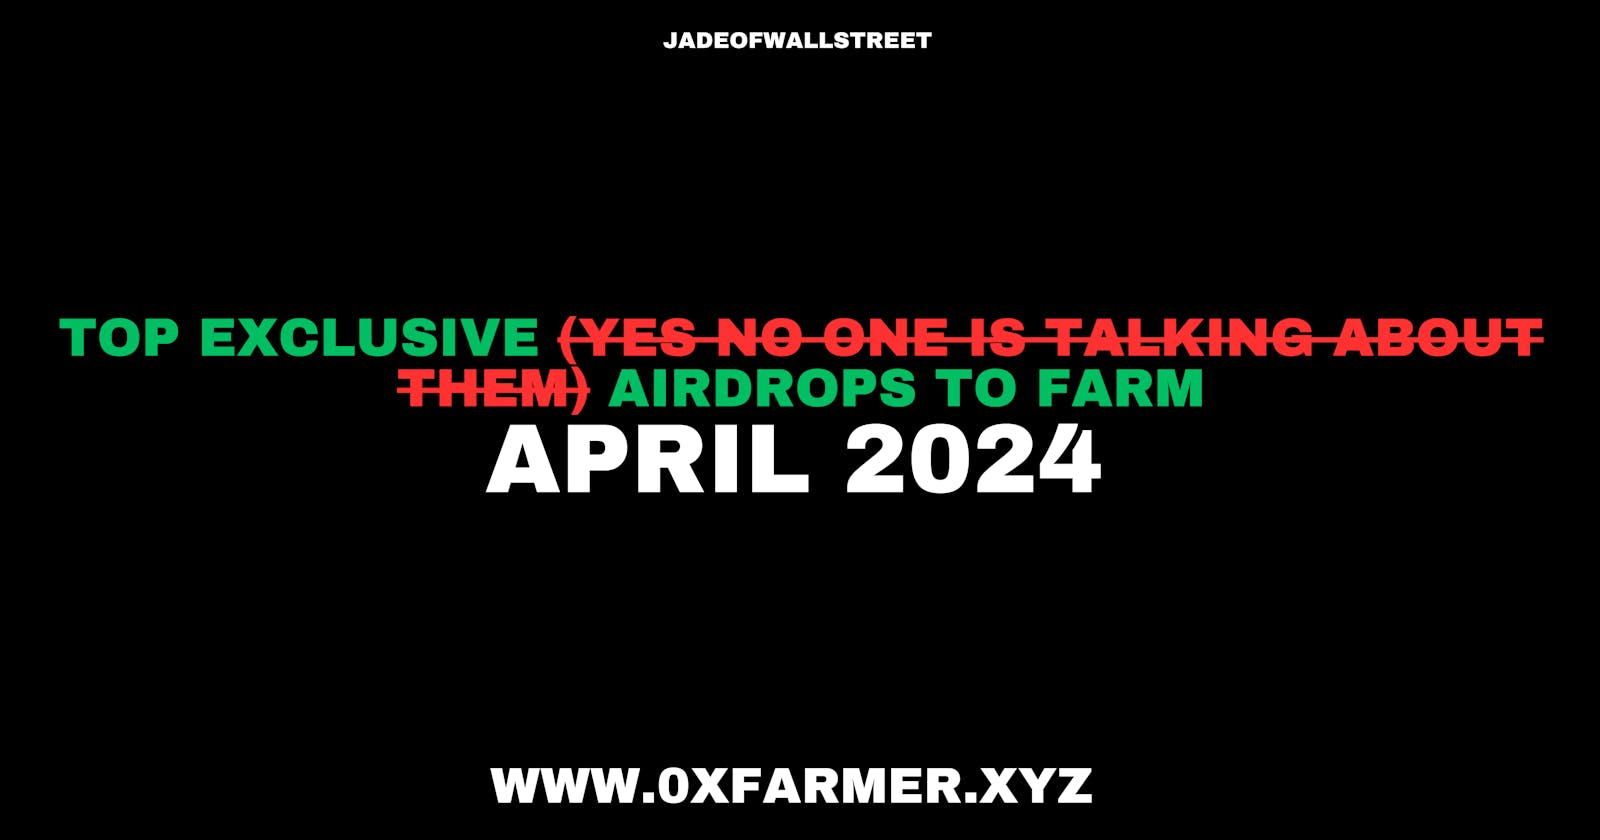 Top Exclusive Airdrops To Farm In April